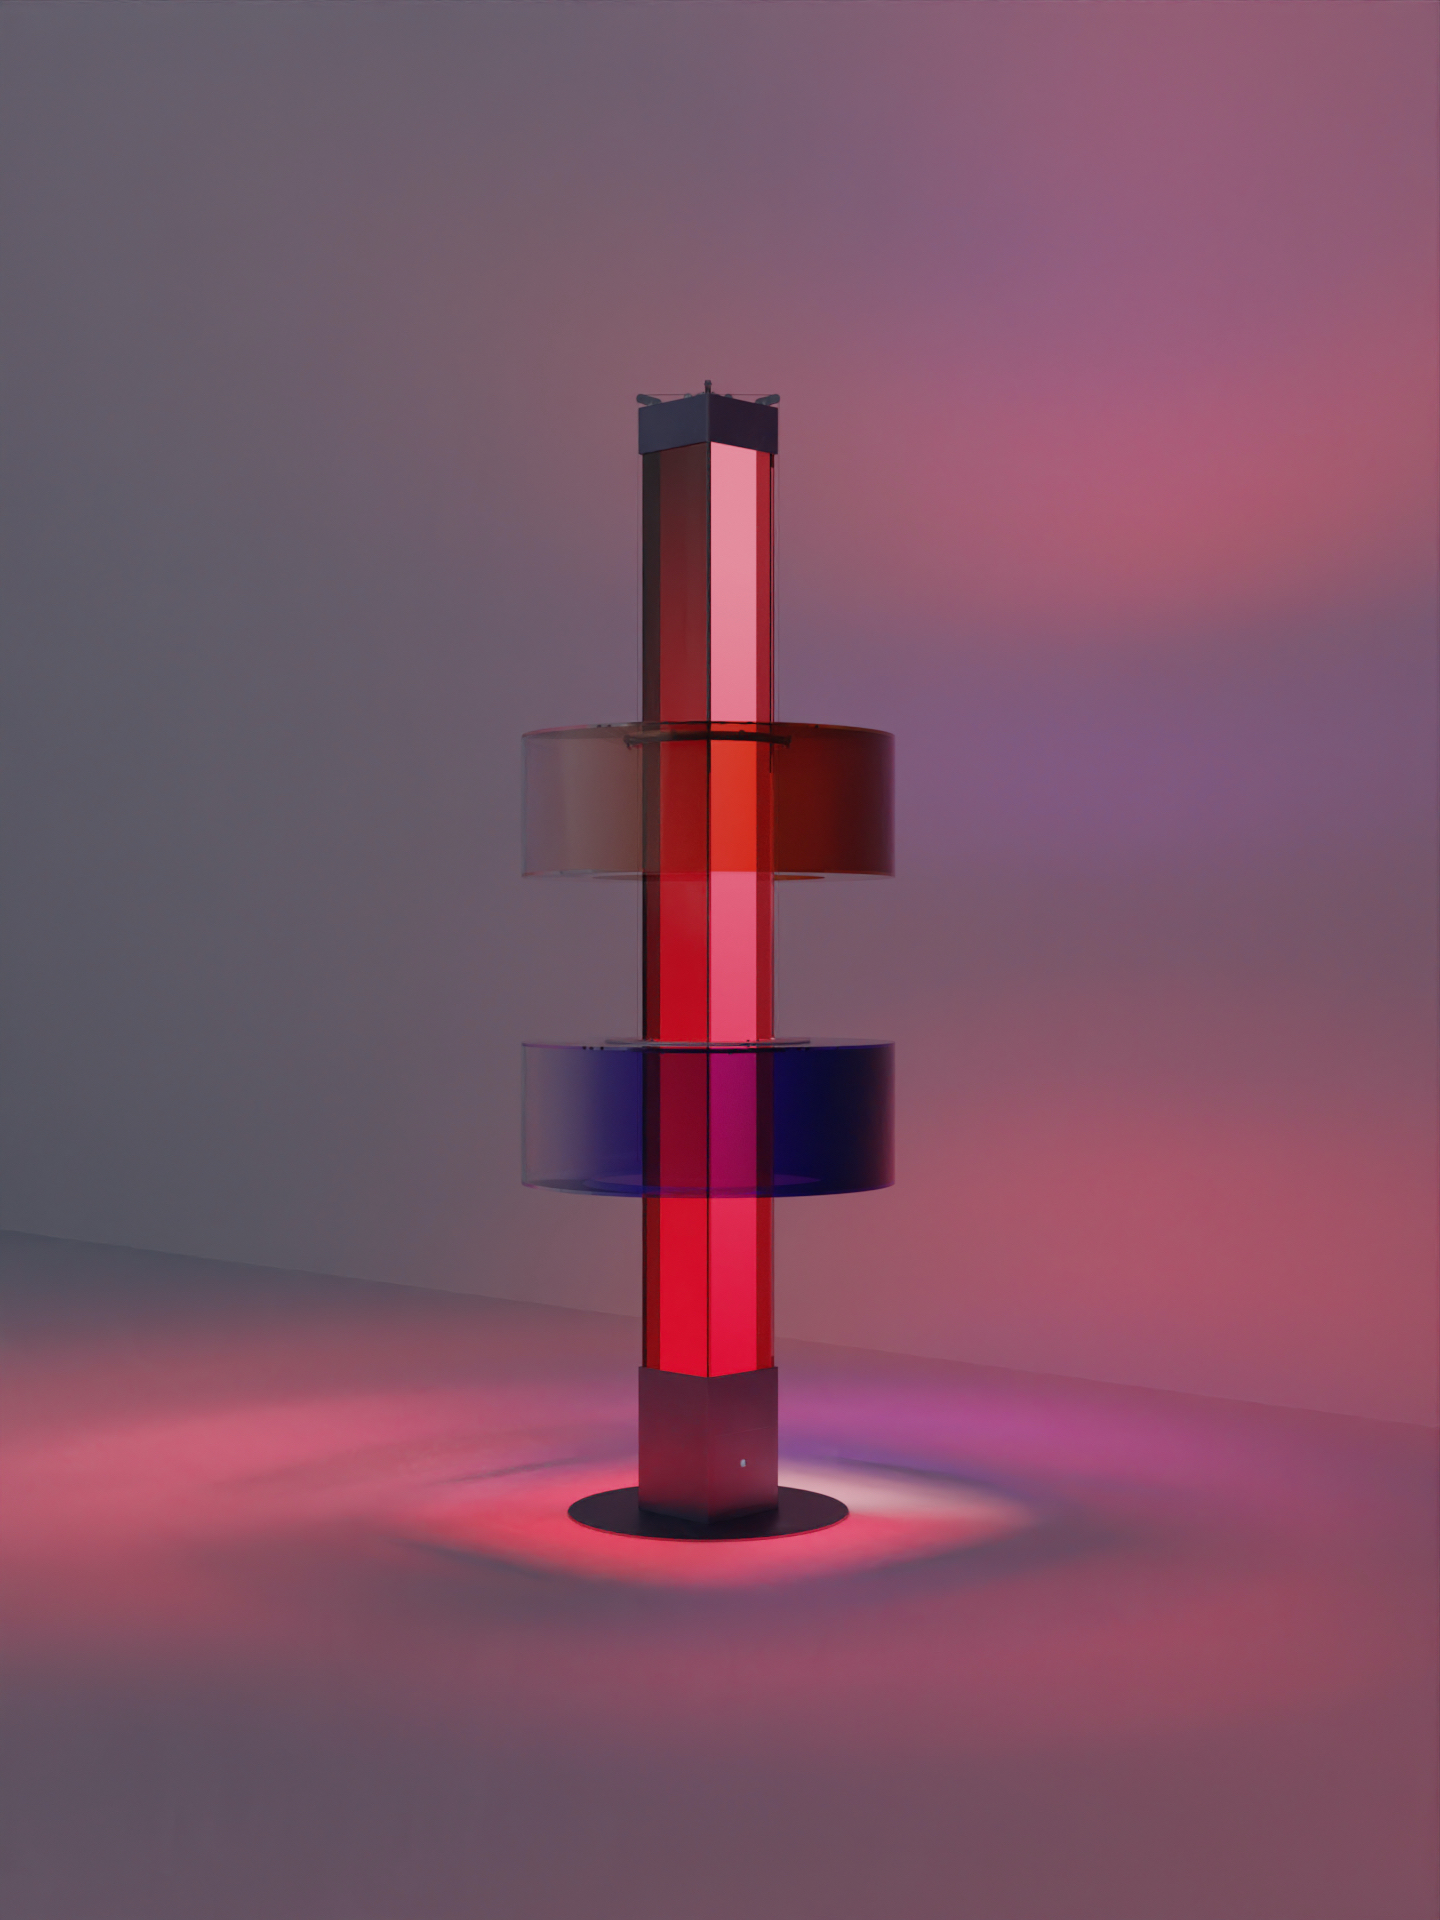 'Colonne Noailles' by Agathe Labaye and Florian Sumi at Charles Burnand Gallery at Salon Art + Design 2023 in Effect Magazine